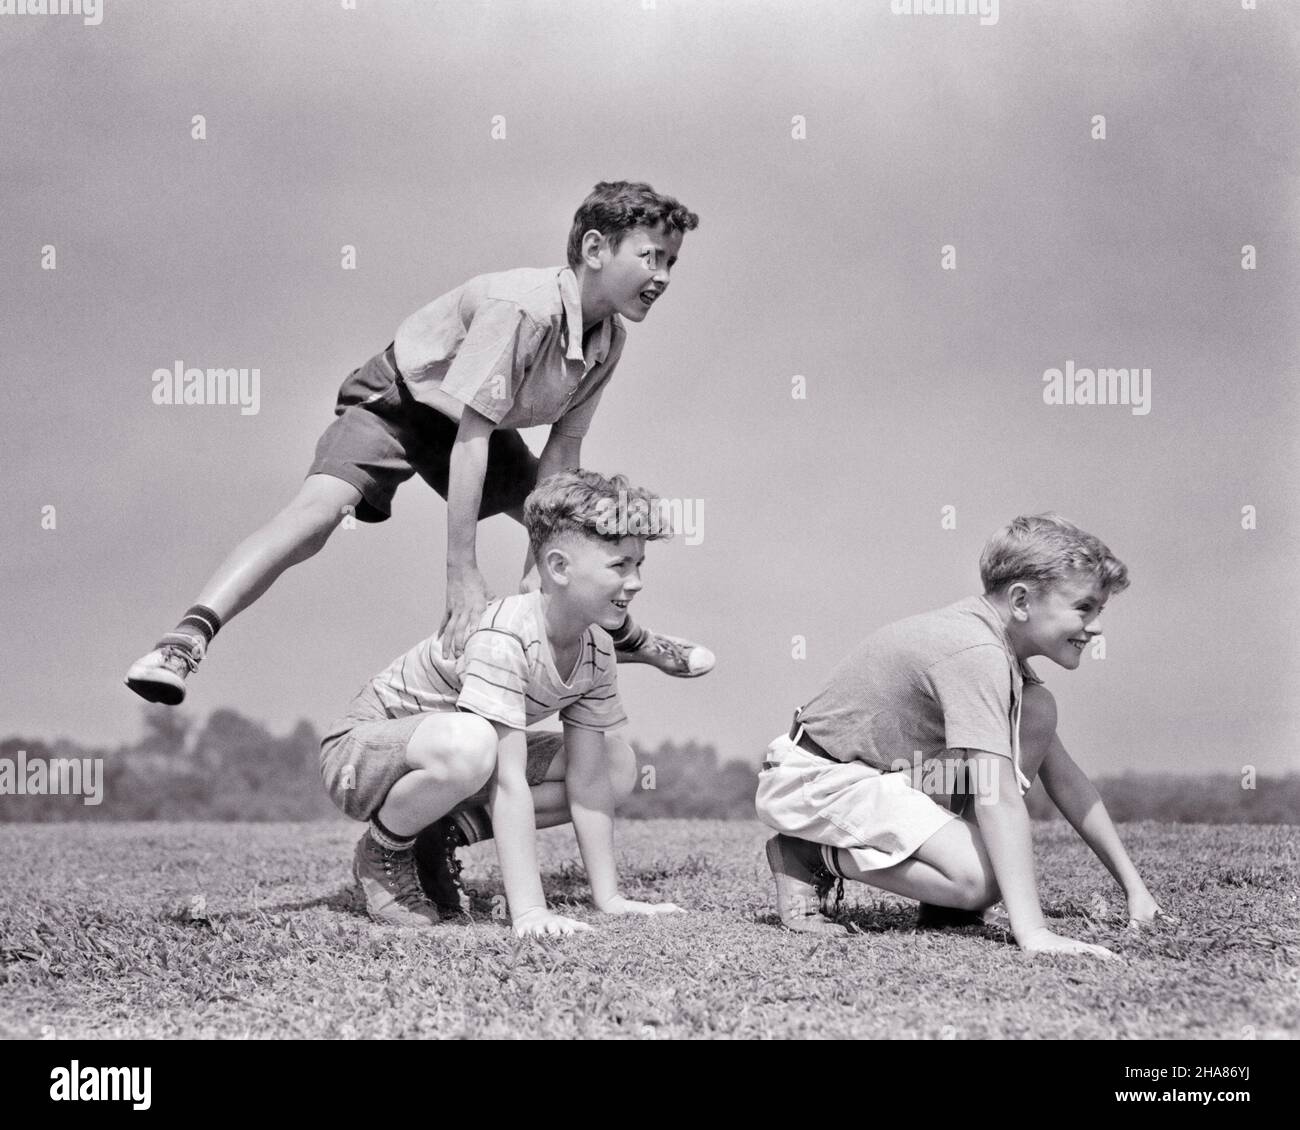 1930s THREE BOYS IN A ROW JUMPING PLAYING LEAP FROG - b4388 HAR001 HARS ...